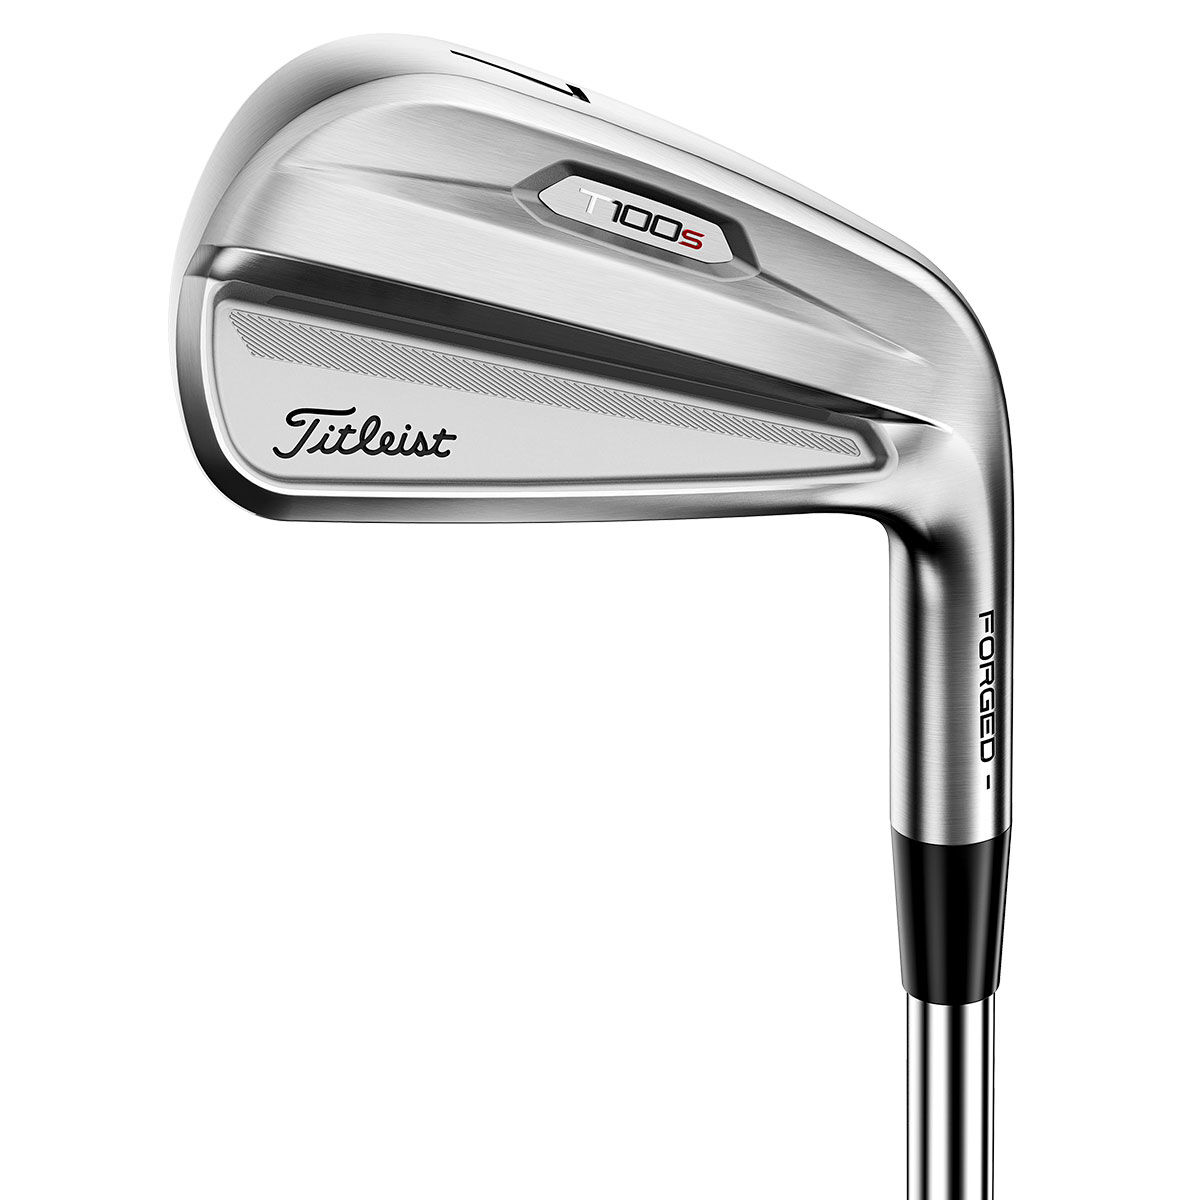 Titleist Silver and Black Printed T100S Steel Golf Irons 2021, Mens, 4-Pw (7 Irons), Left Hand, Steel | American Golf, Size: Stiff